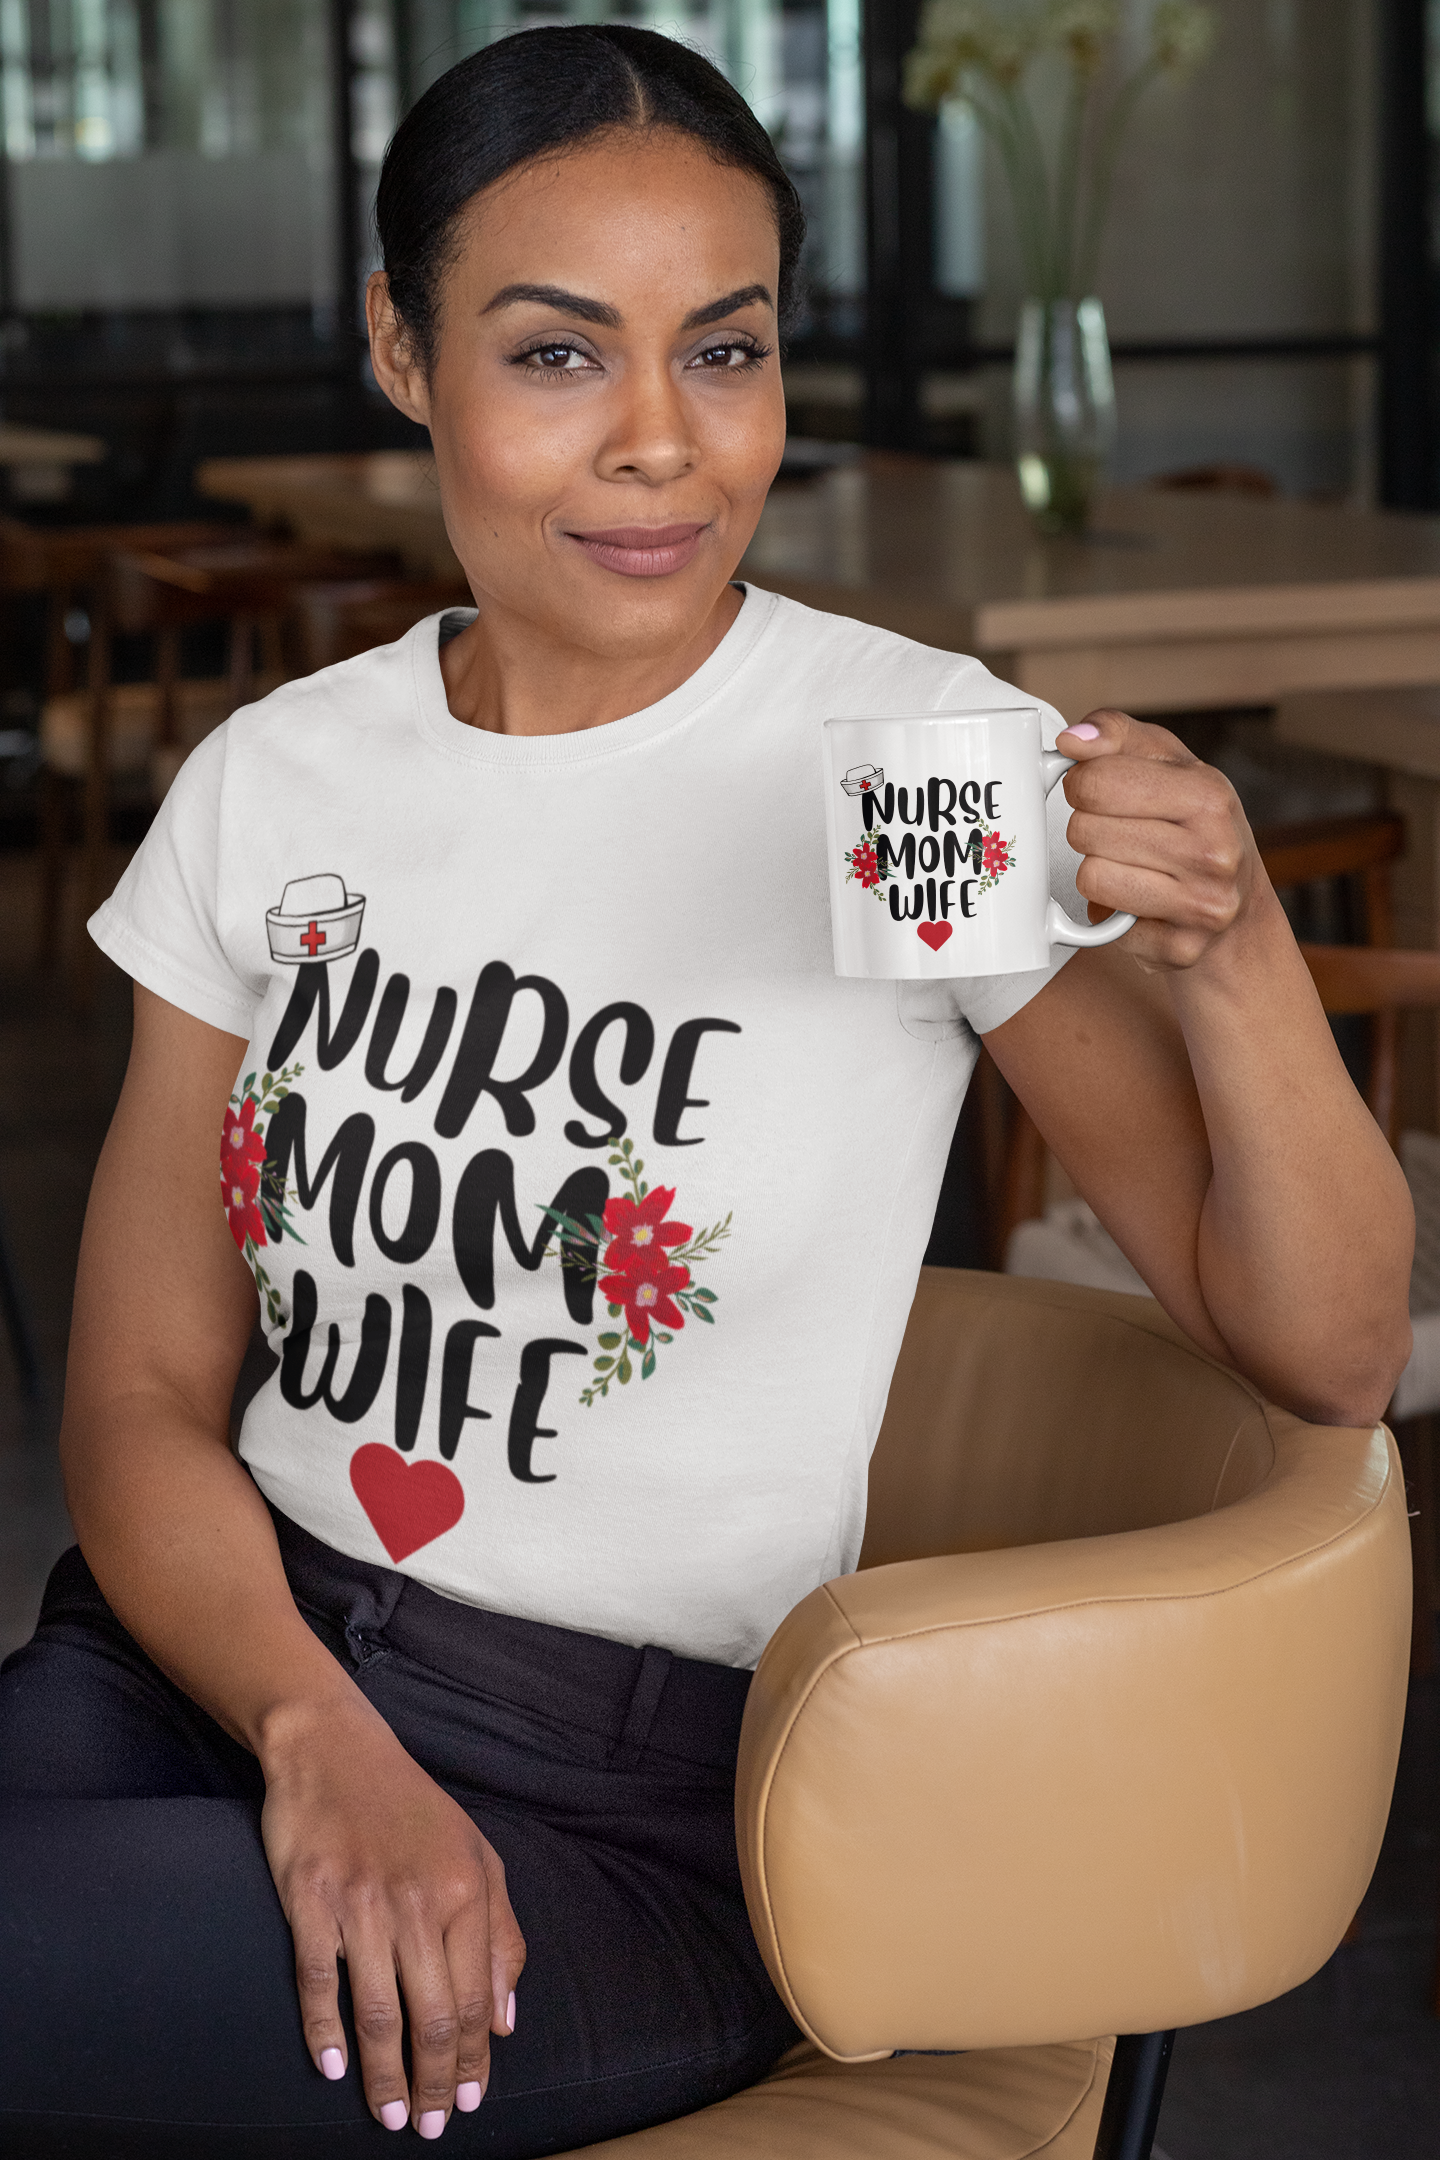 Nurse.Mom.Wife Graphic Tee: Celebrate Your Multifaceted Journey!